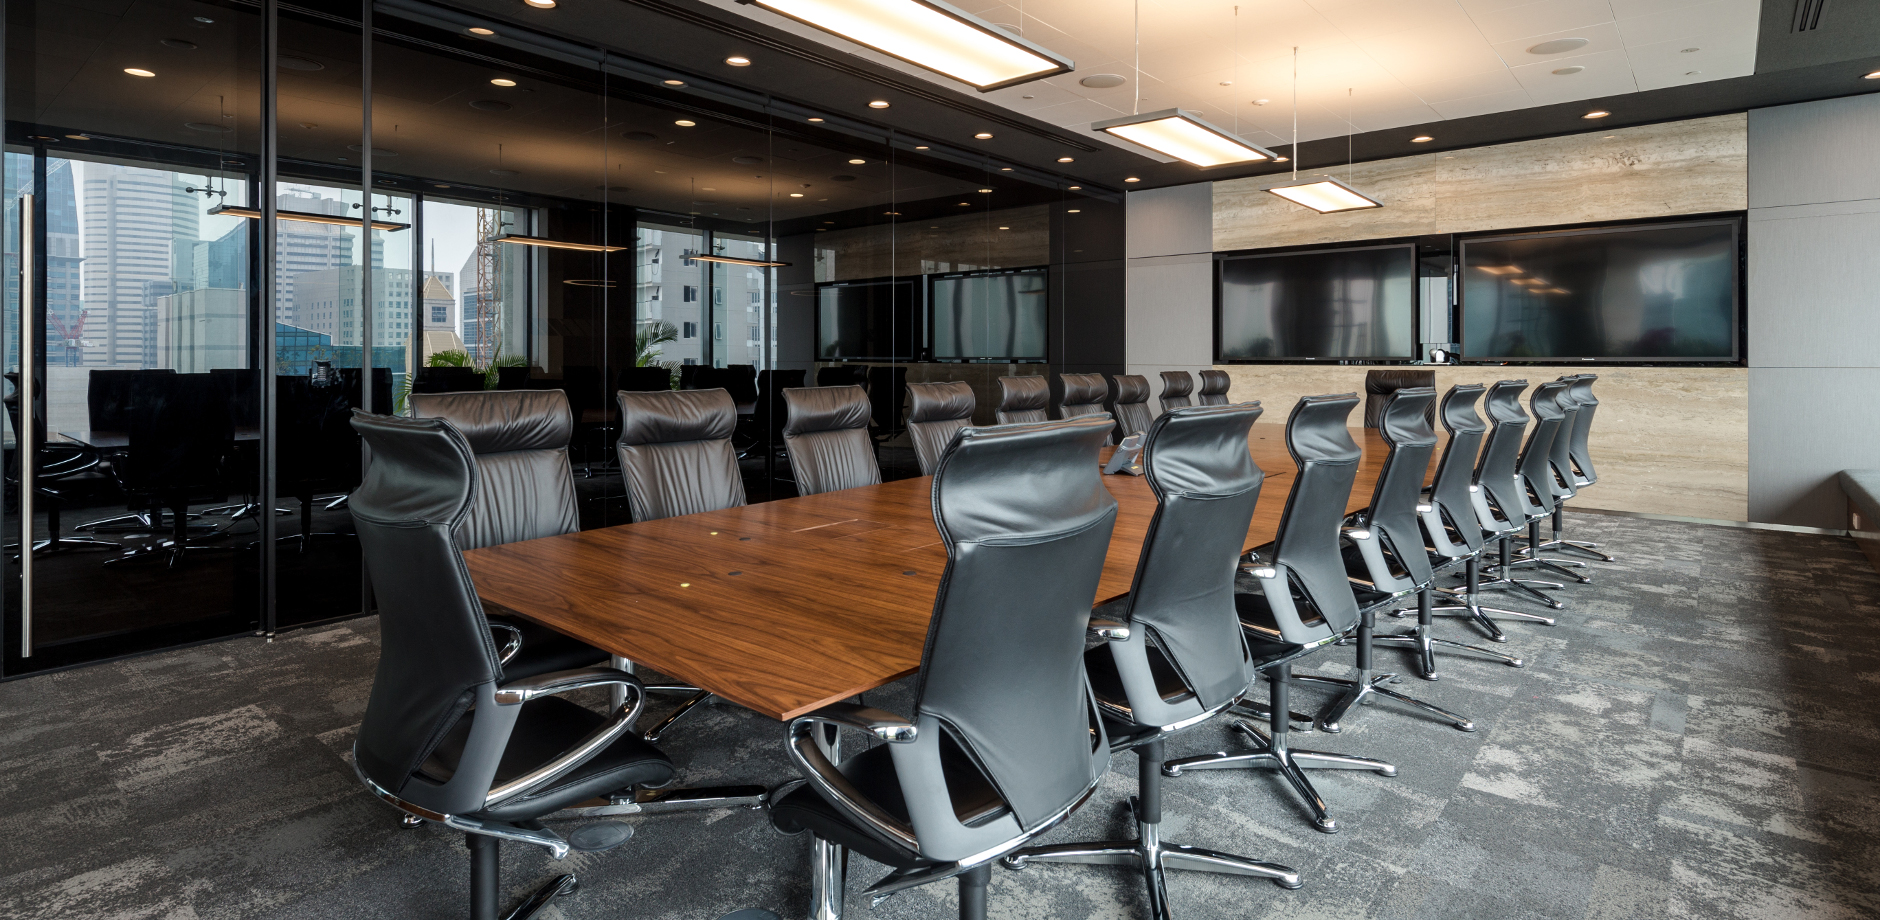 Conference room reference - Investment company Singapore